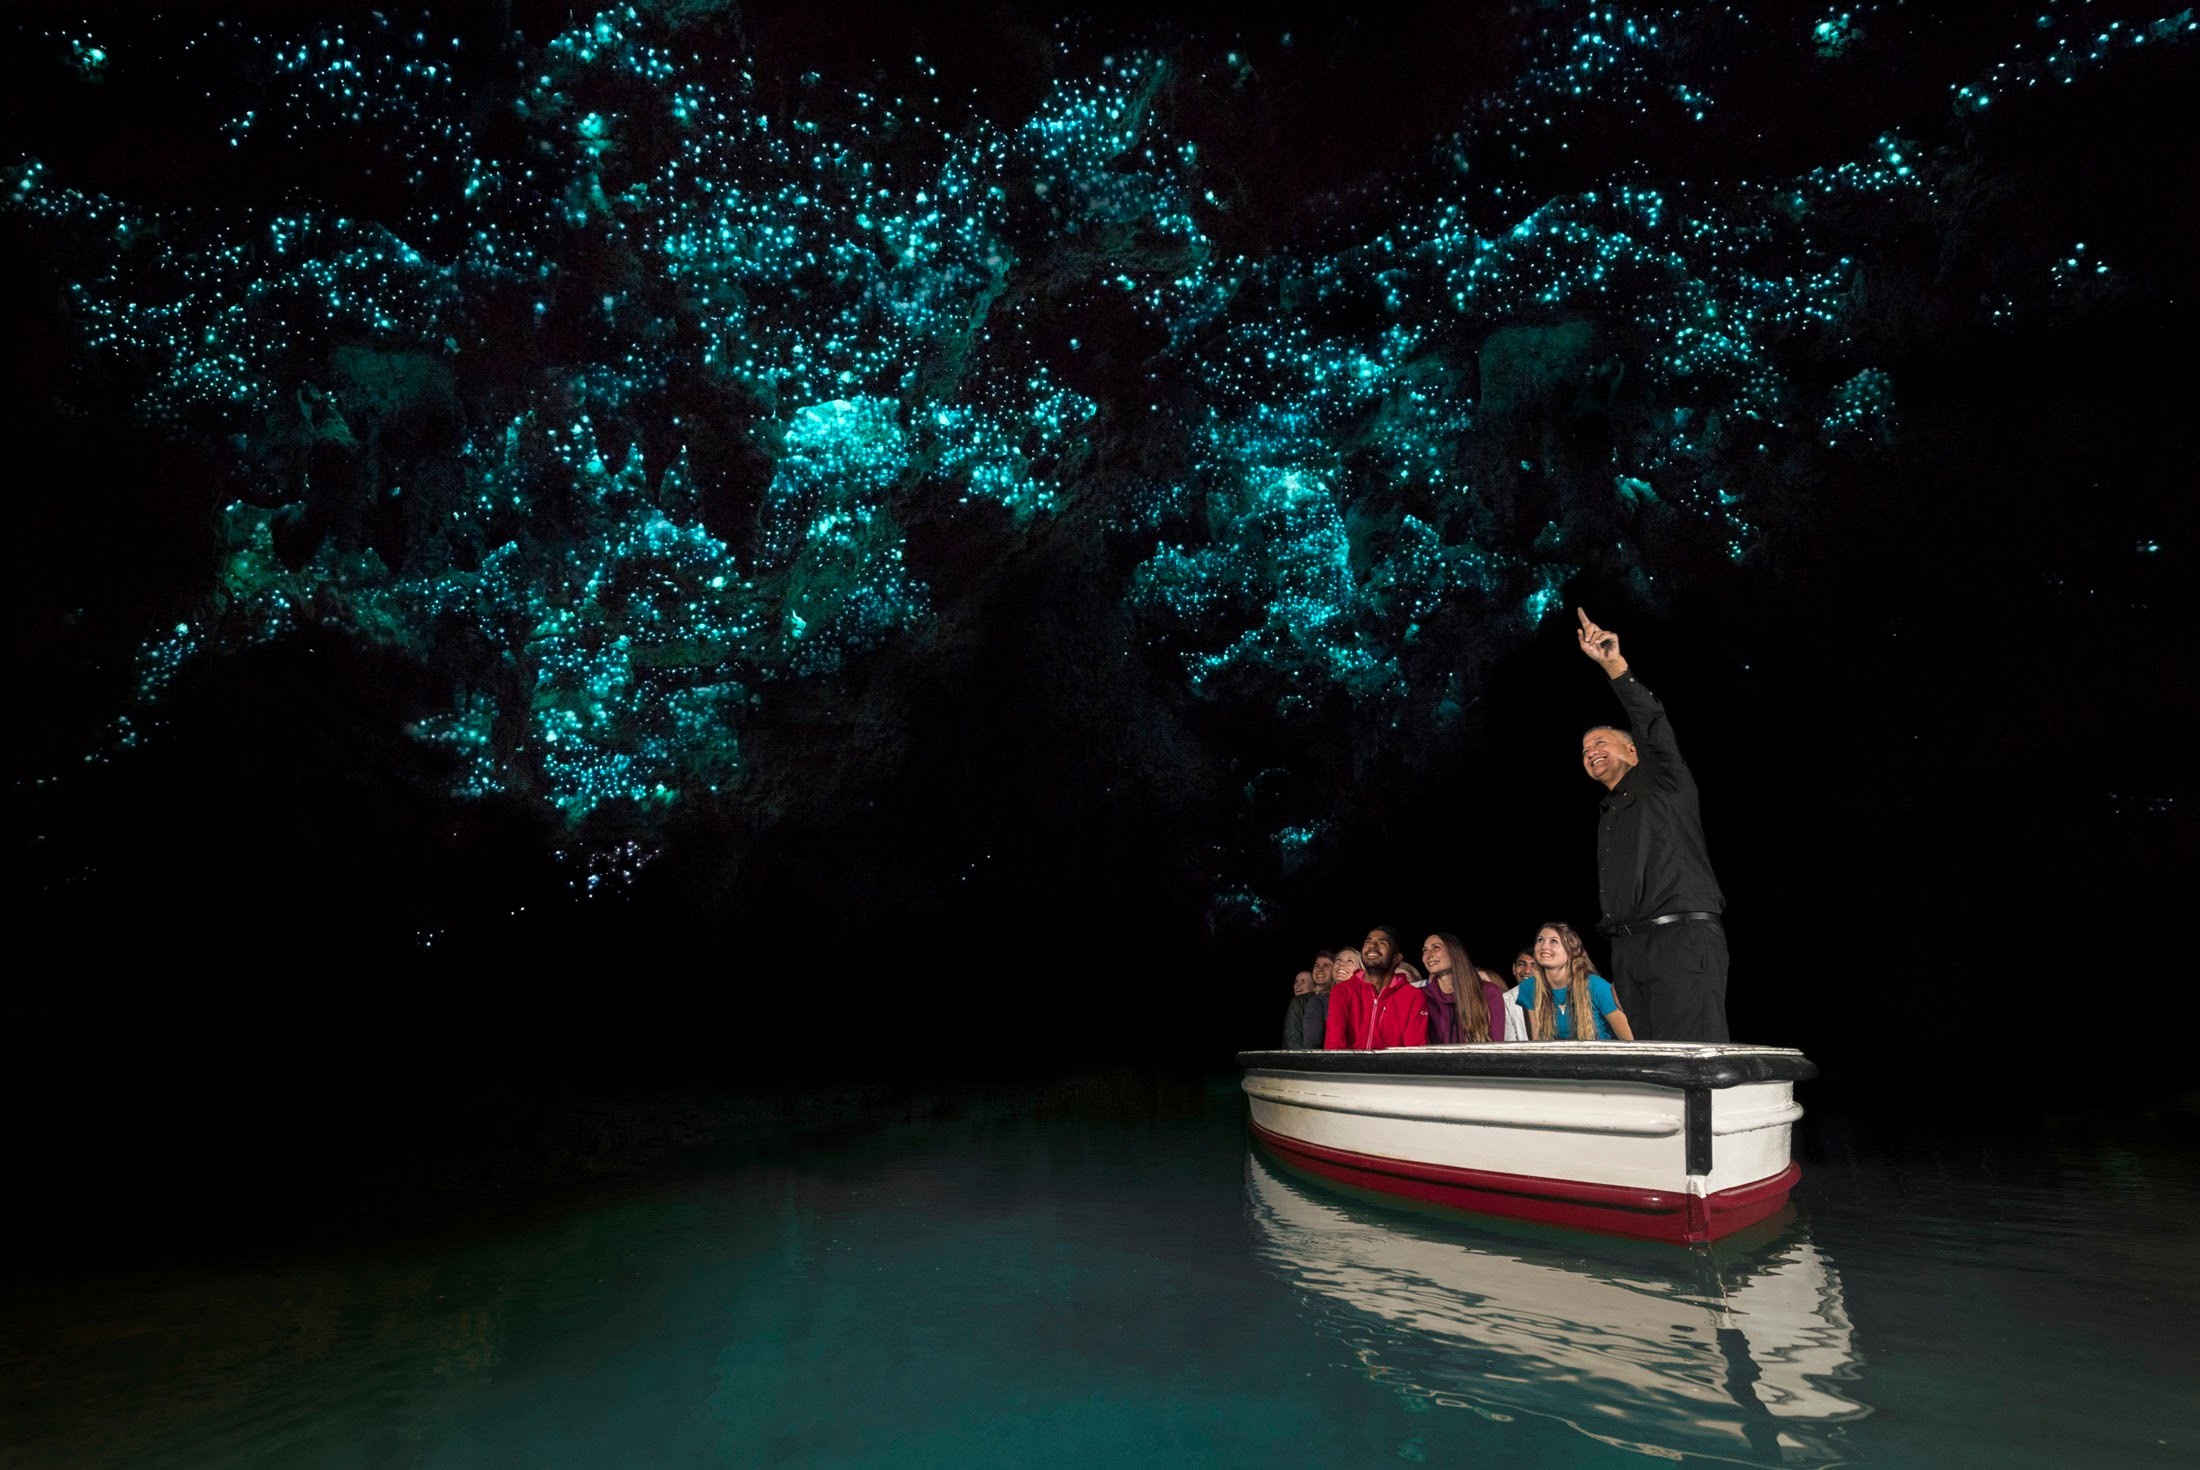 Nature Cave Boat Tourism New Zealand People Smiling Water Lake Worms Glowing Reflection Men Women 2200x1470